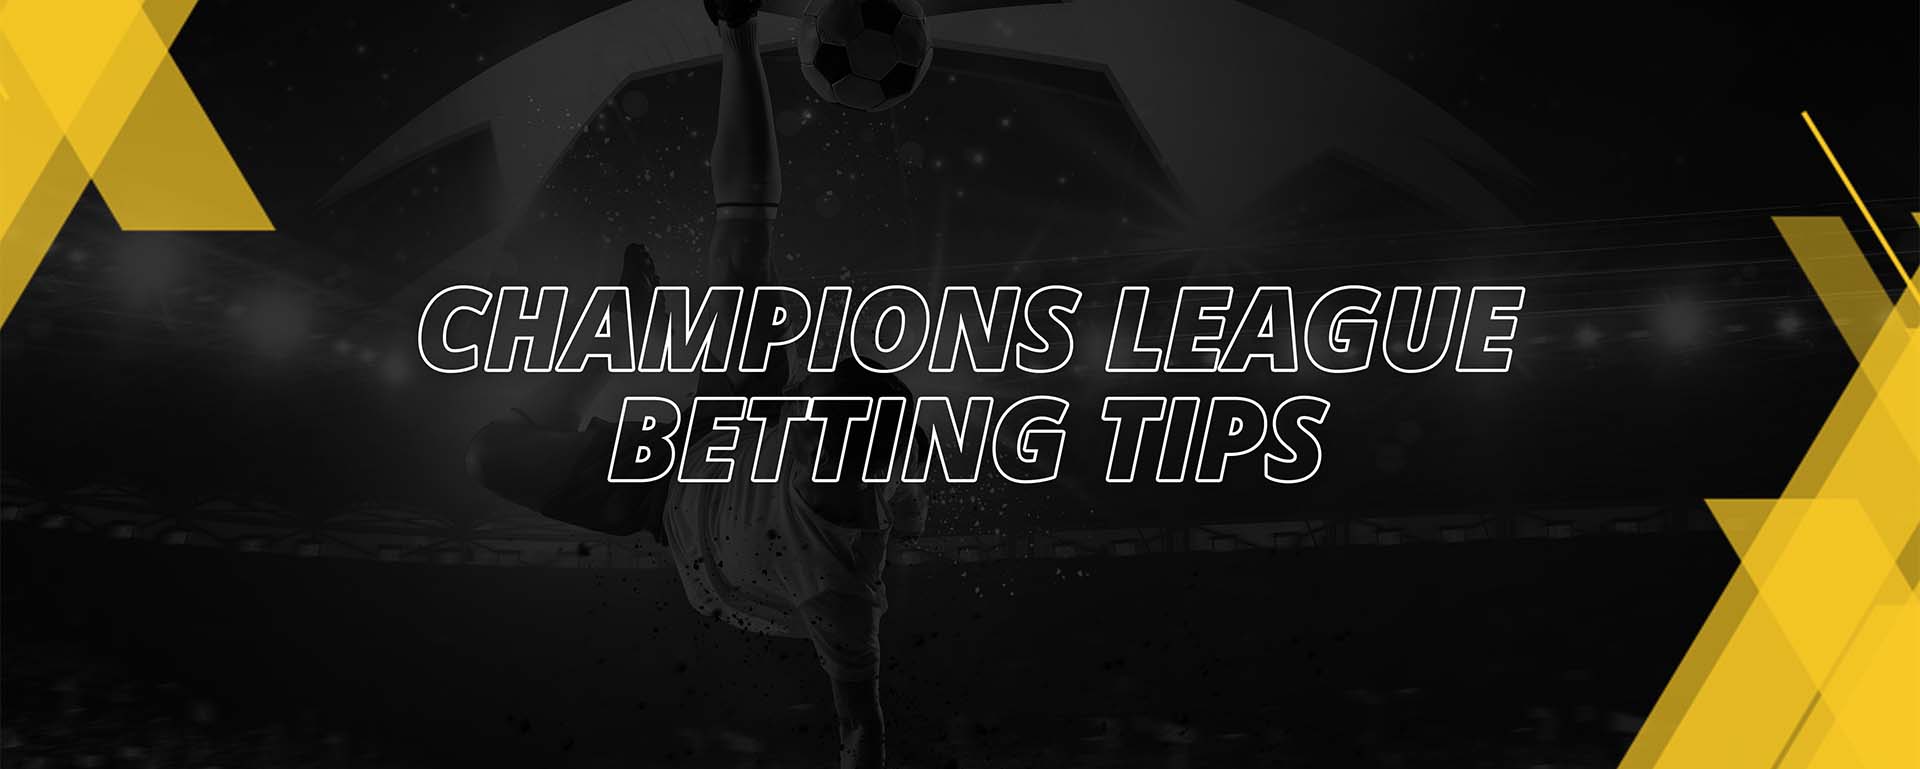 CHAMPIONS LEAGUE BETTING TIPS